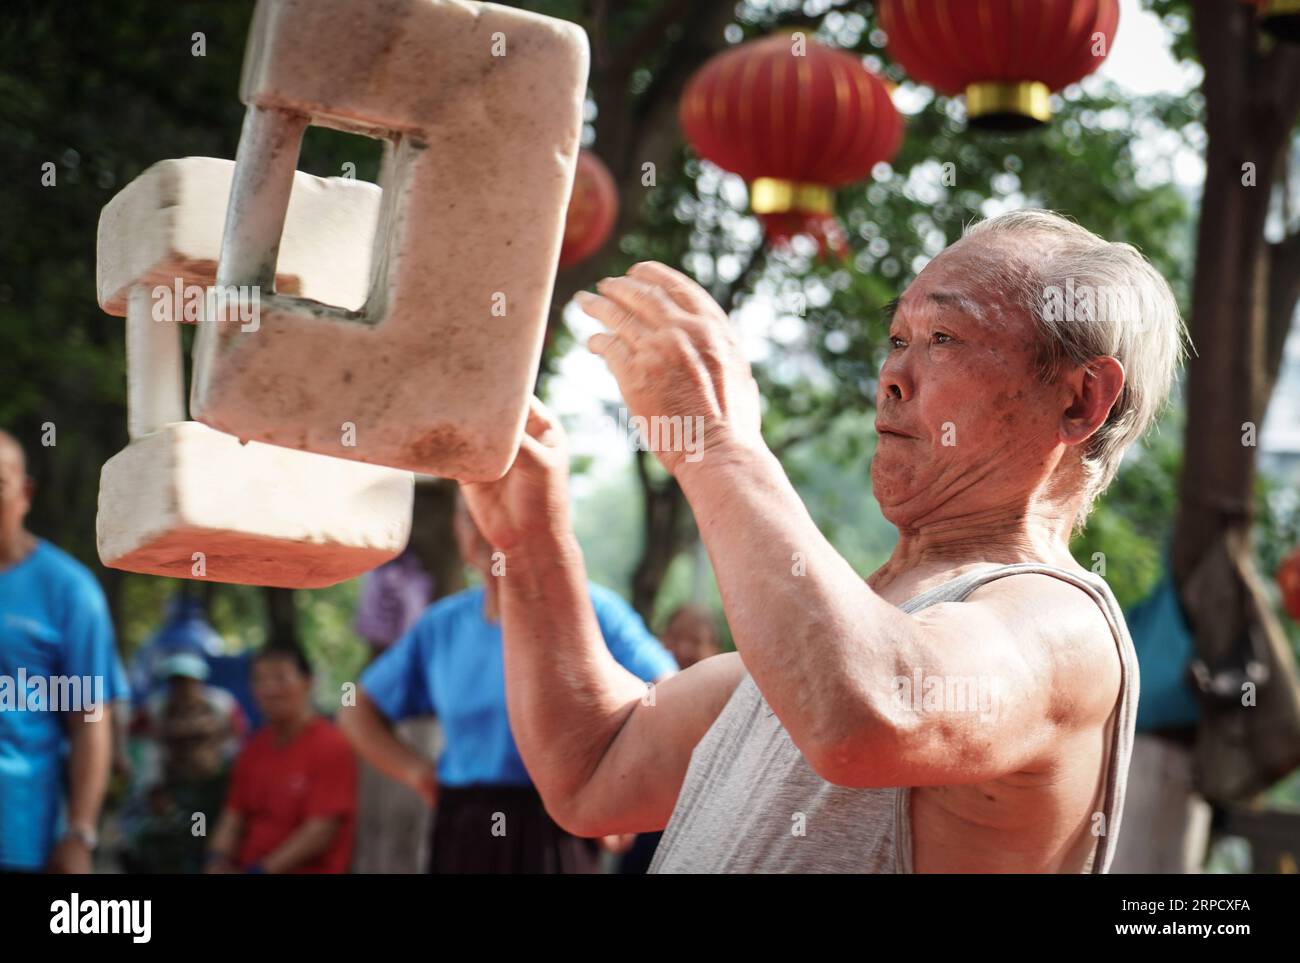 (190715) -- NANJING, July 15, 2019 -- Liu Liangjin, 75, practices Shisuo skills at Yinxiang in Nanjing, east China s Jiangsu Province, June 5, 2019. Shisuo (stone lock), a stone dumbbell in the form of ancient padlock, is usually seen in the traditional Chinese workout routine. With hundreds of workout moves, Shisuo exercise can not only enhance strength, but also help people to coordinate hands, eyes and the body. Shisuo dates back to the Tang Dynasty in which soldiers first used it to build their bodies. The Shisuo exercise has a long history in Nanjing, east China s Jiangsu Province. Endear Stock Photo